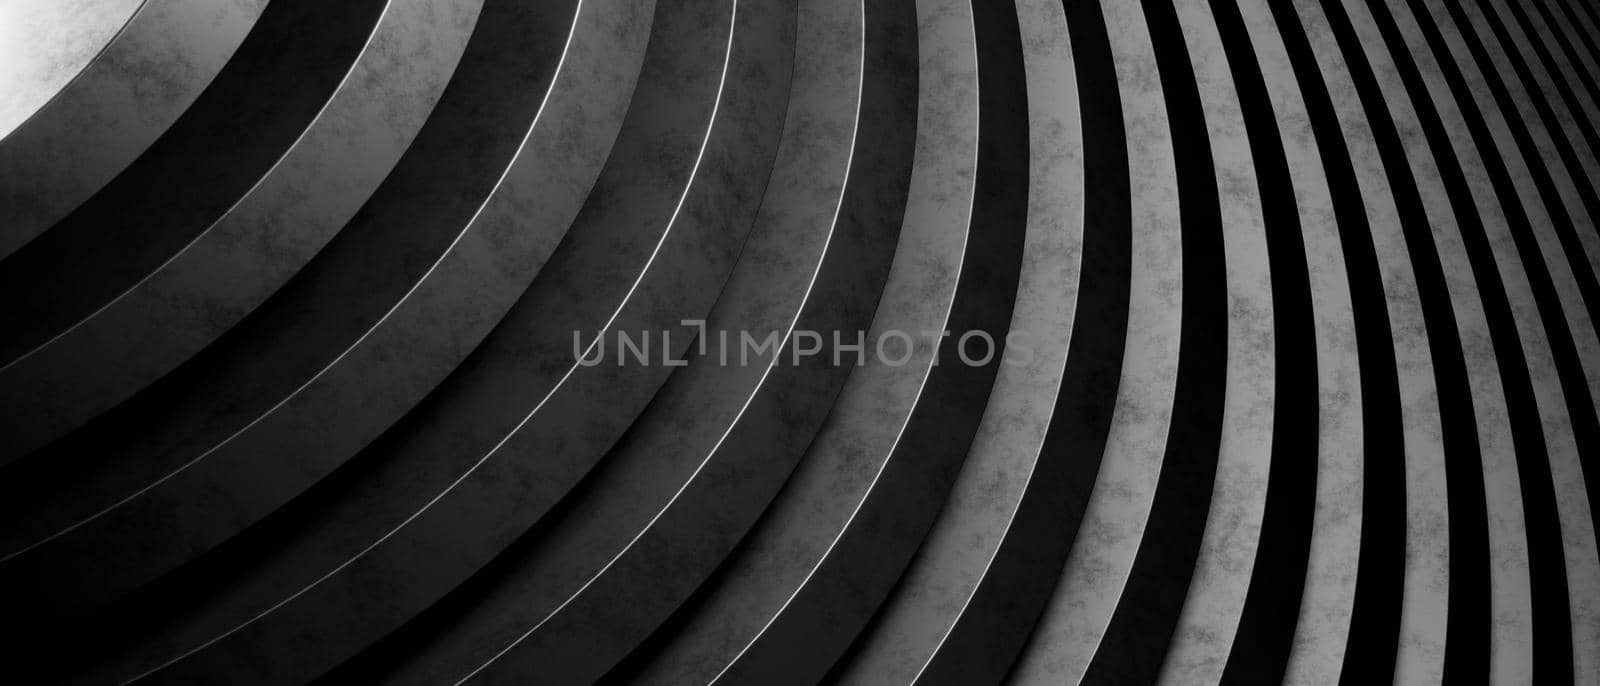 Metallic Style Abstract Minimal Wavy or Curve Lines Architecture Design Black Background Smooth Texture, 3D render Illustration by yay_lmrb